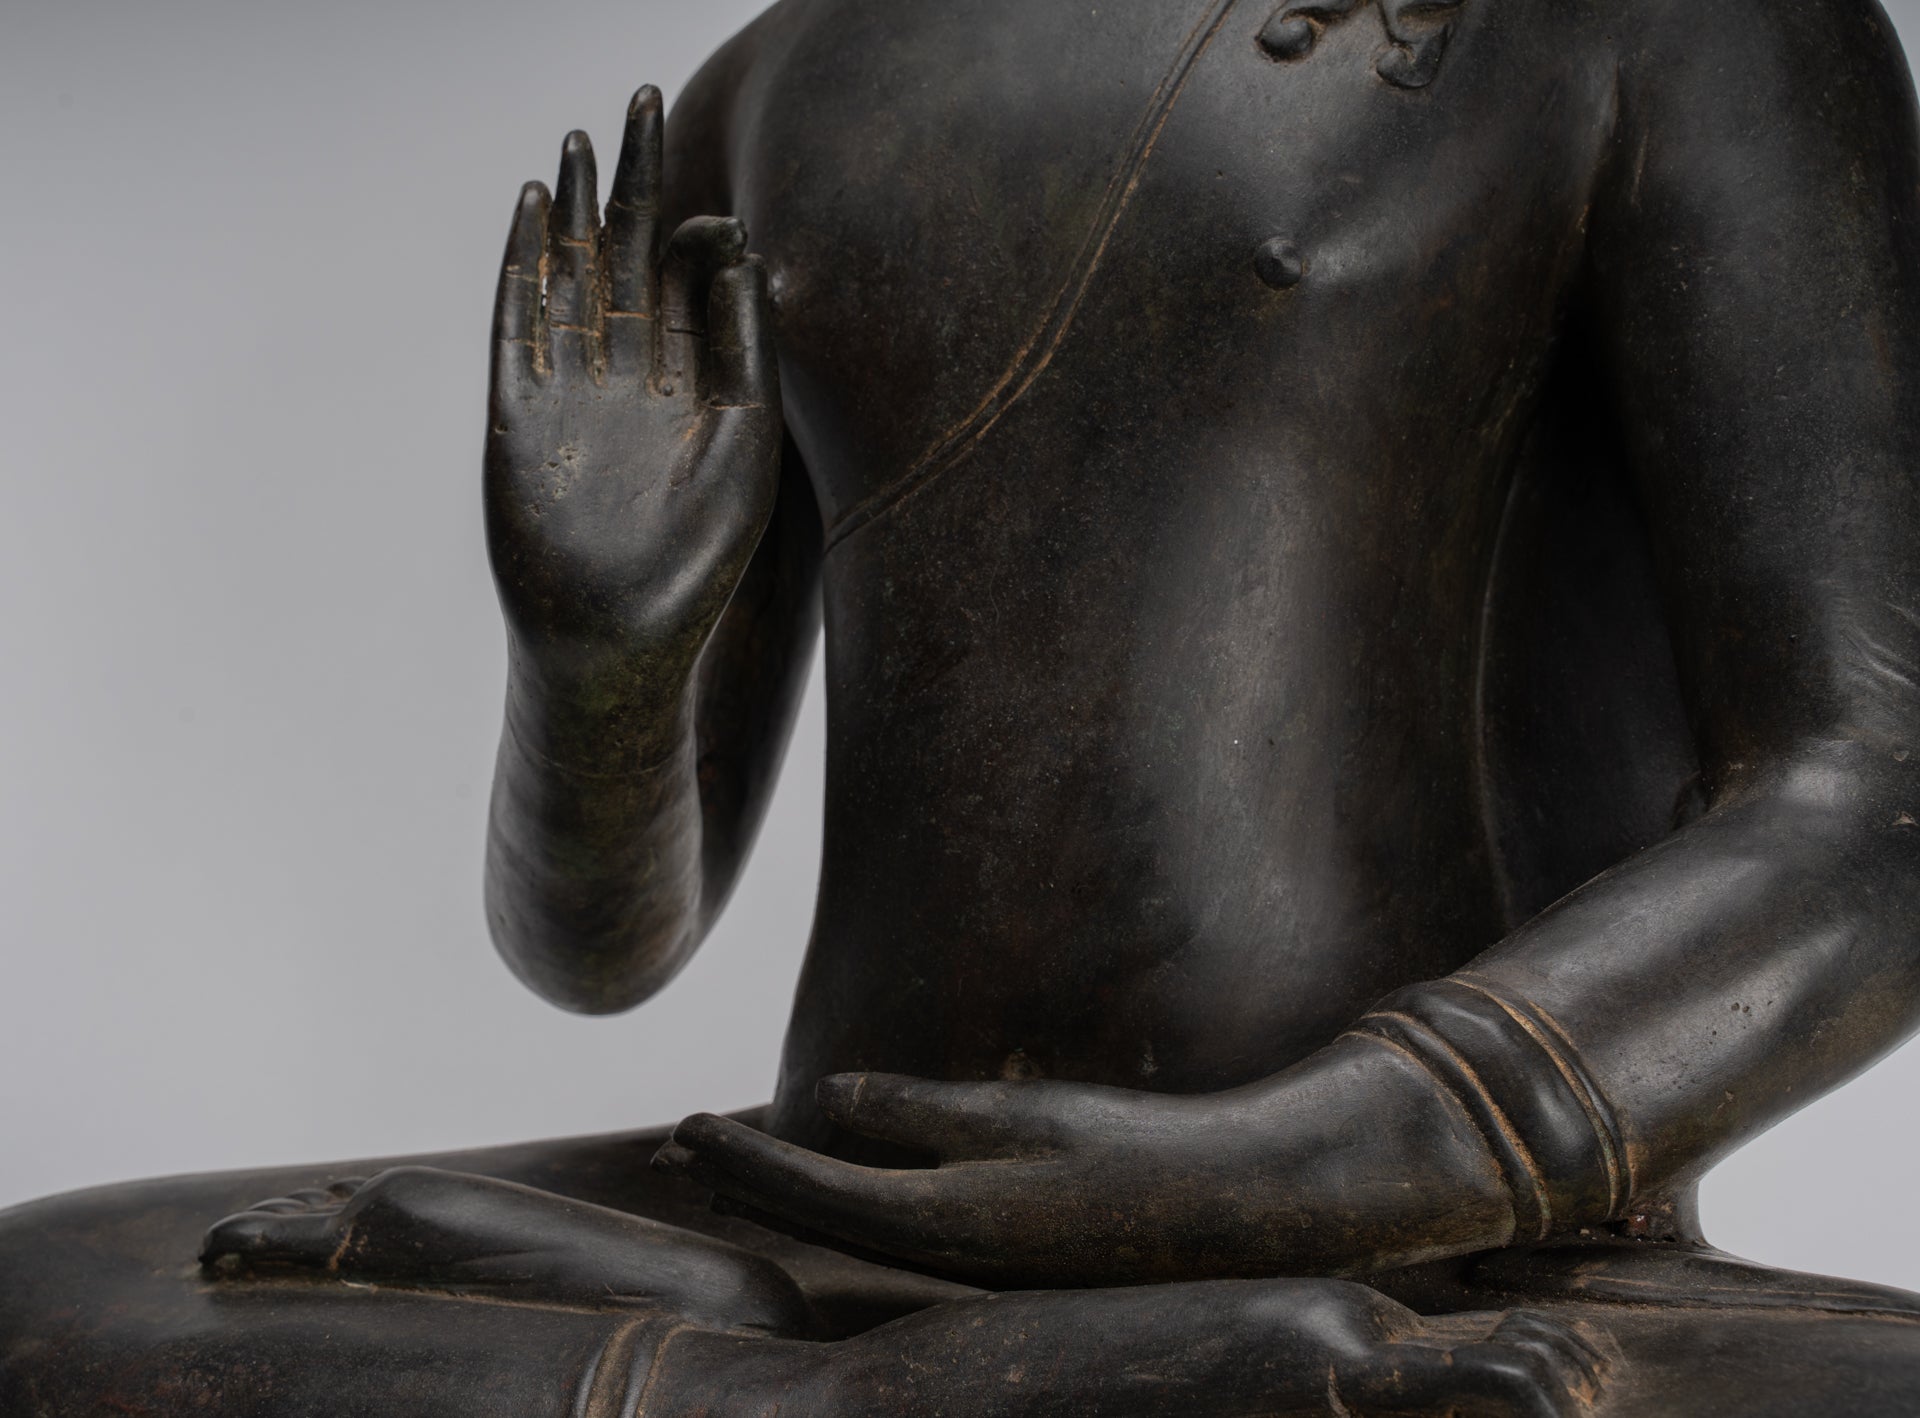 What does the Buddha's hand gesture signify? - Quora